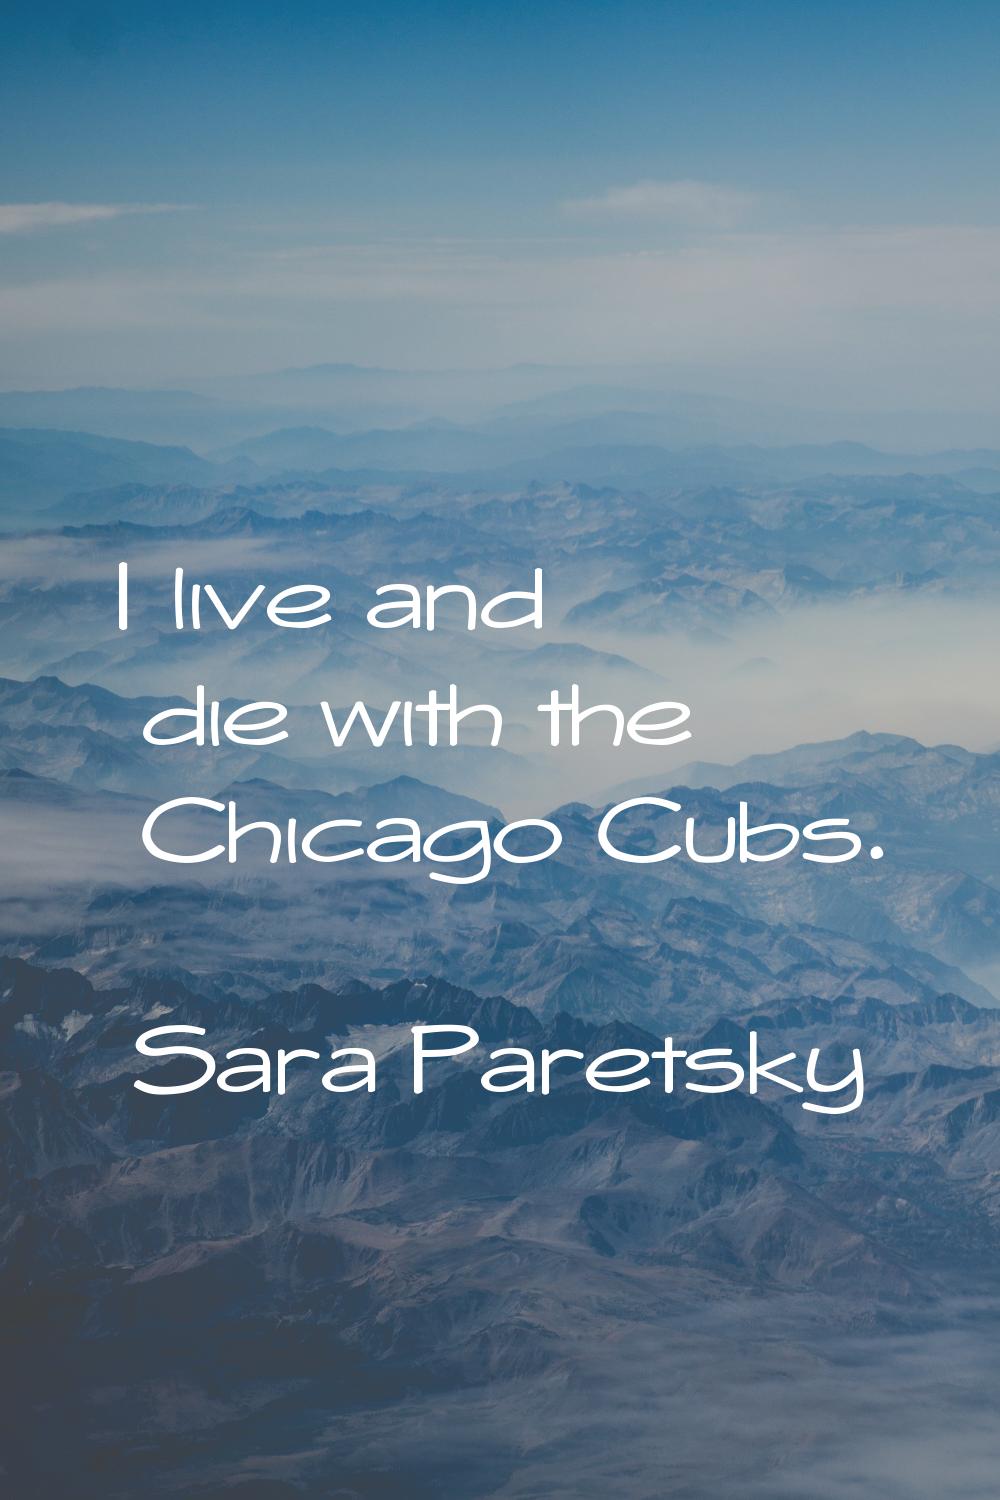 I live and die with the Chicago Cubs.